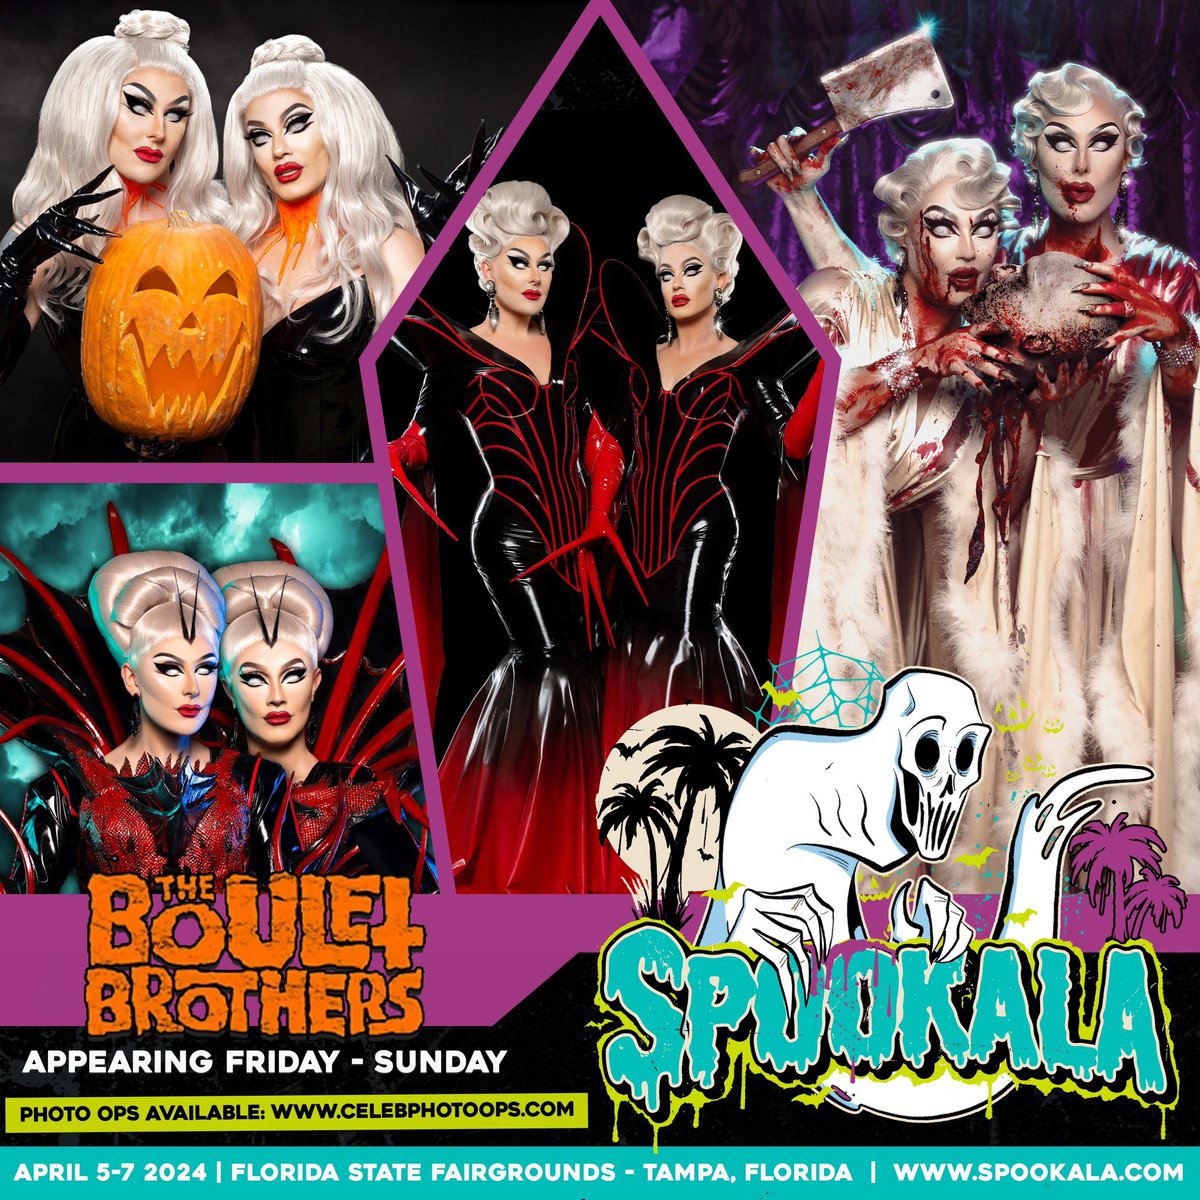 Next weekend! Come meet us at @SpookalaFL (Florida’s Horror & Pop Culture Convention)! Get tickets, M&G and photo options at: spookala.com/copy-of-home-1